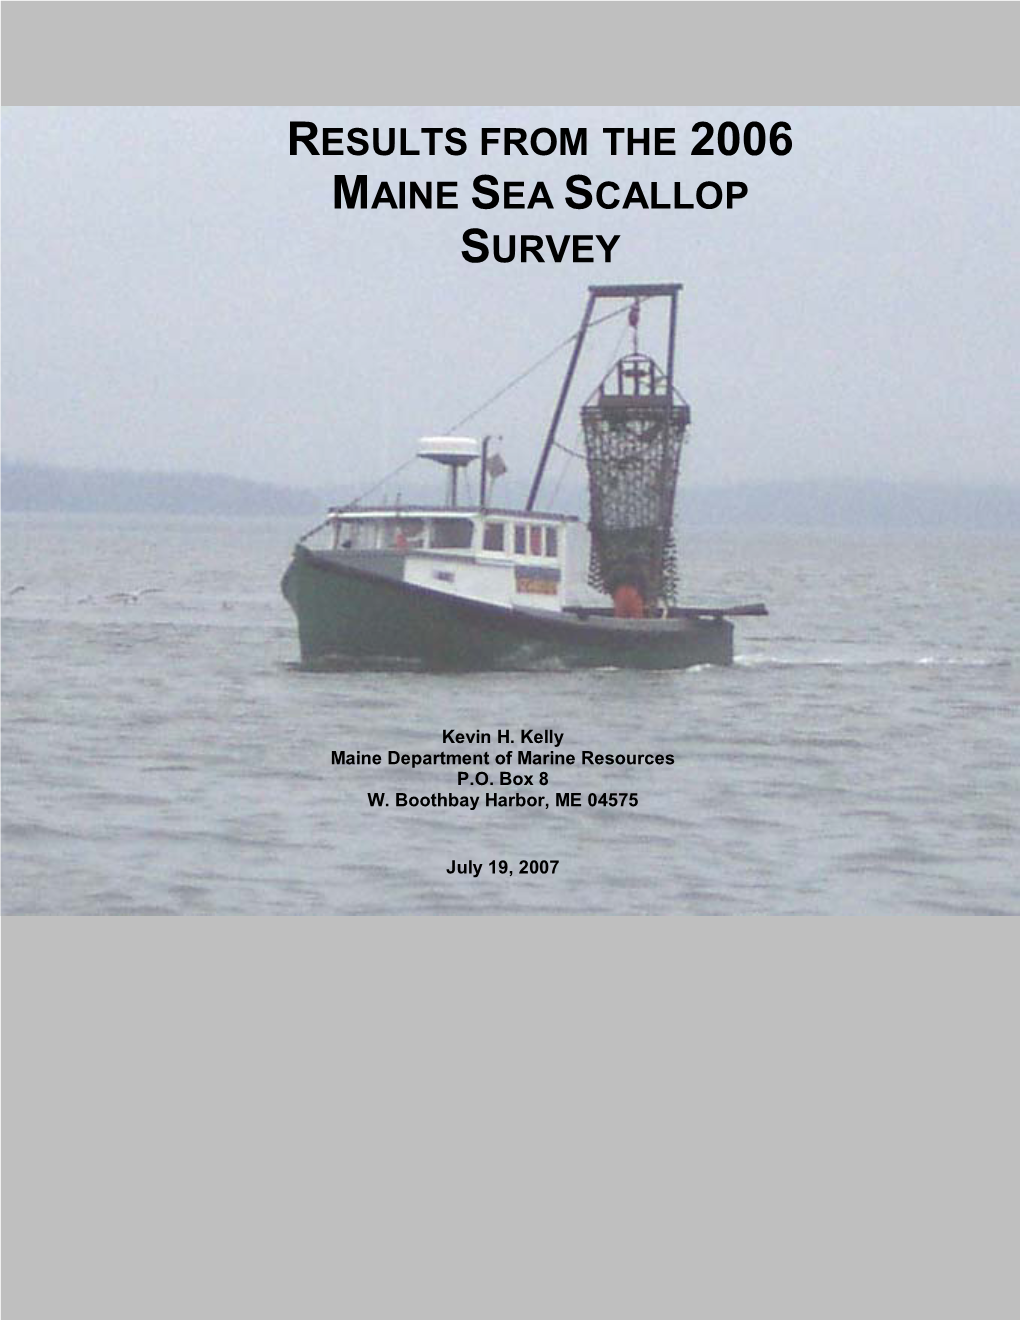 Results from the 2006 Maine Sea Scallop Survey